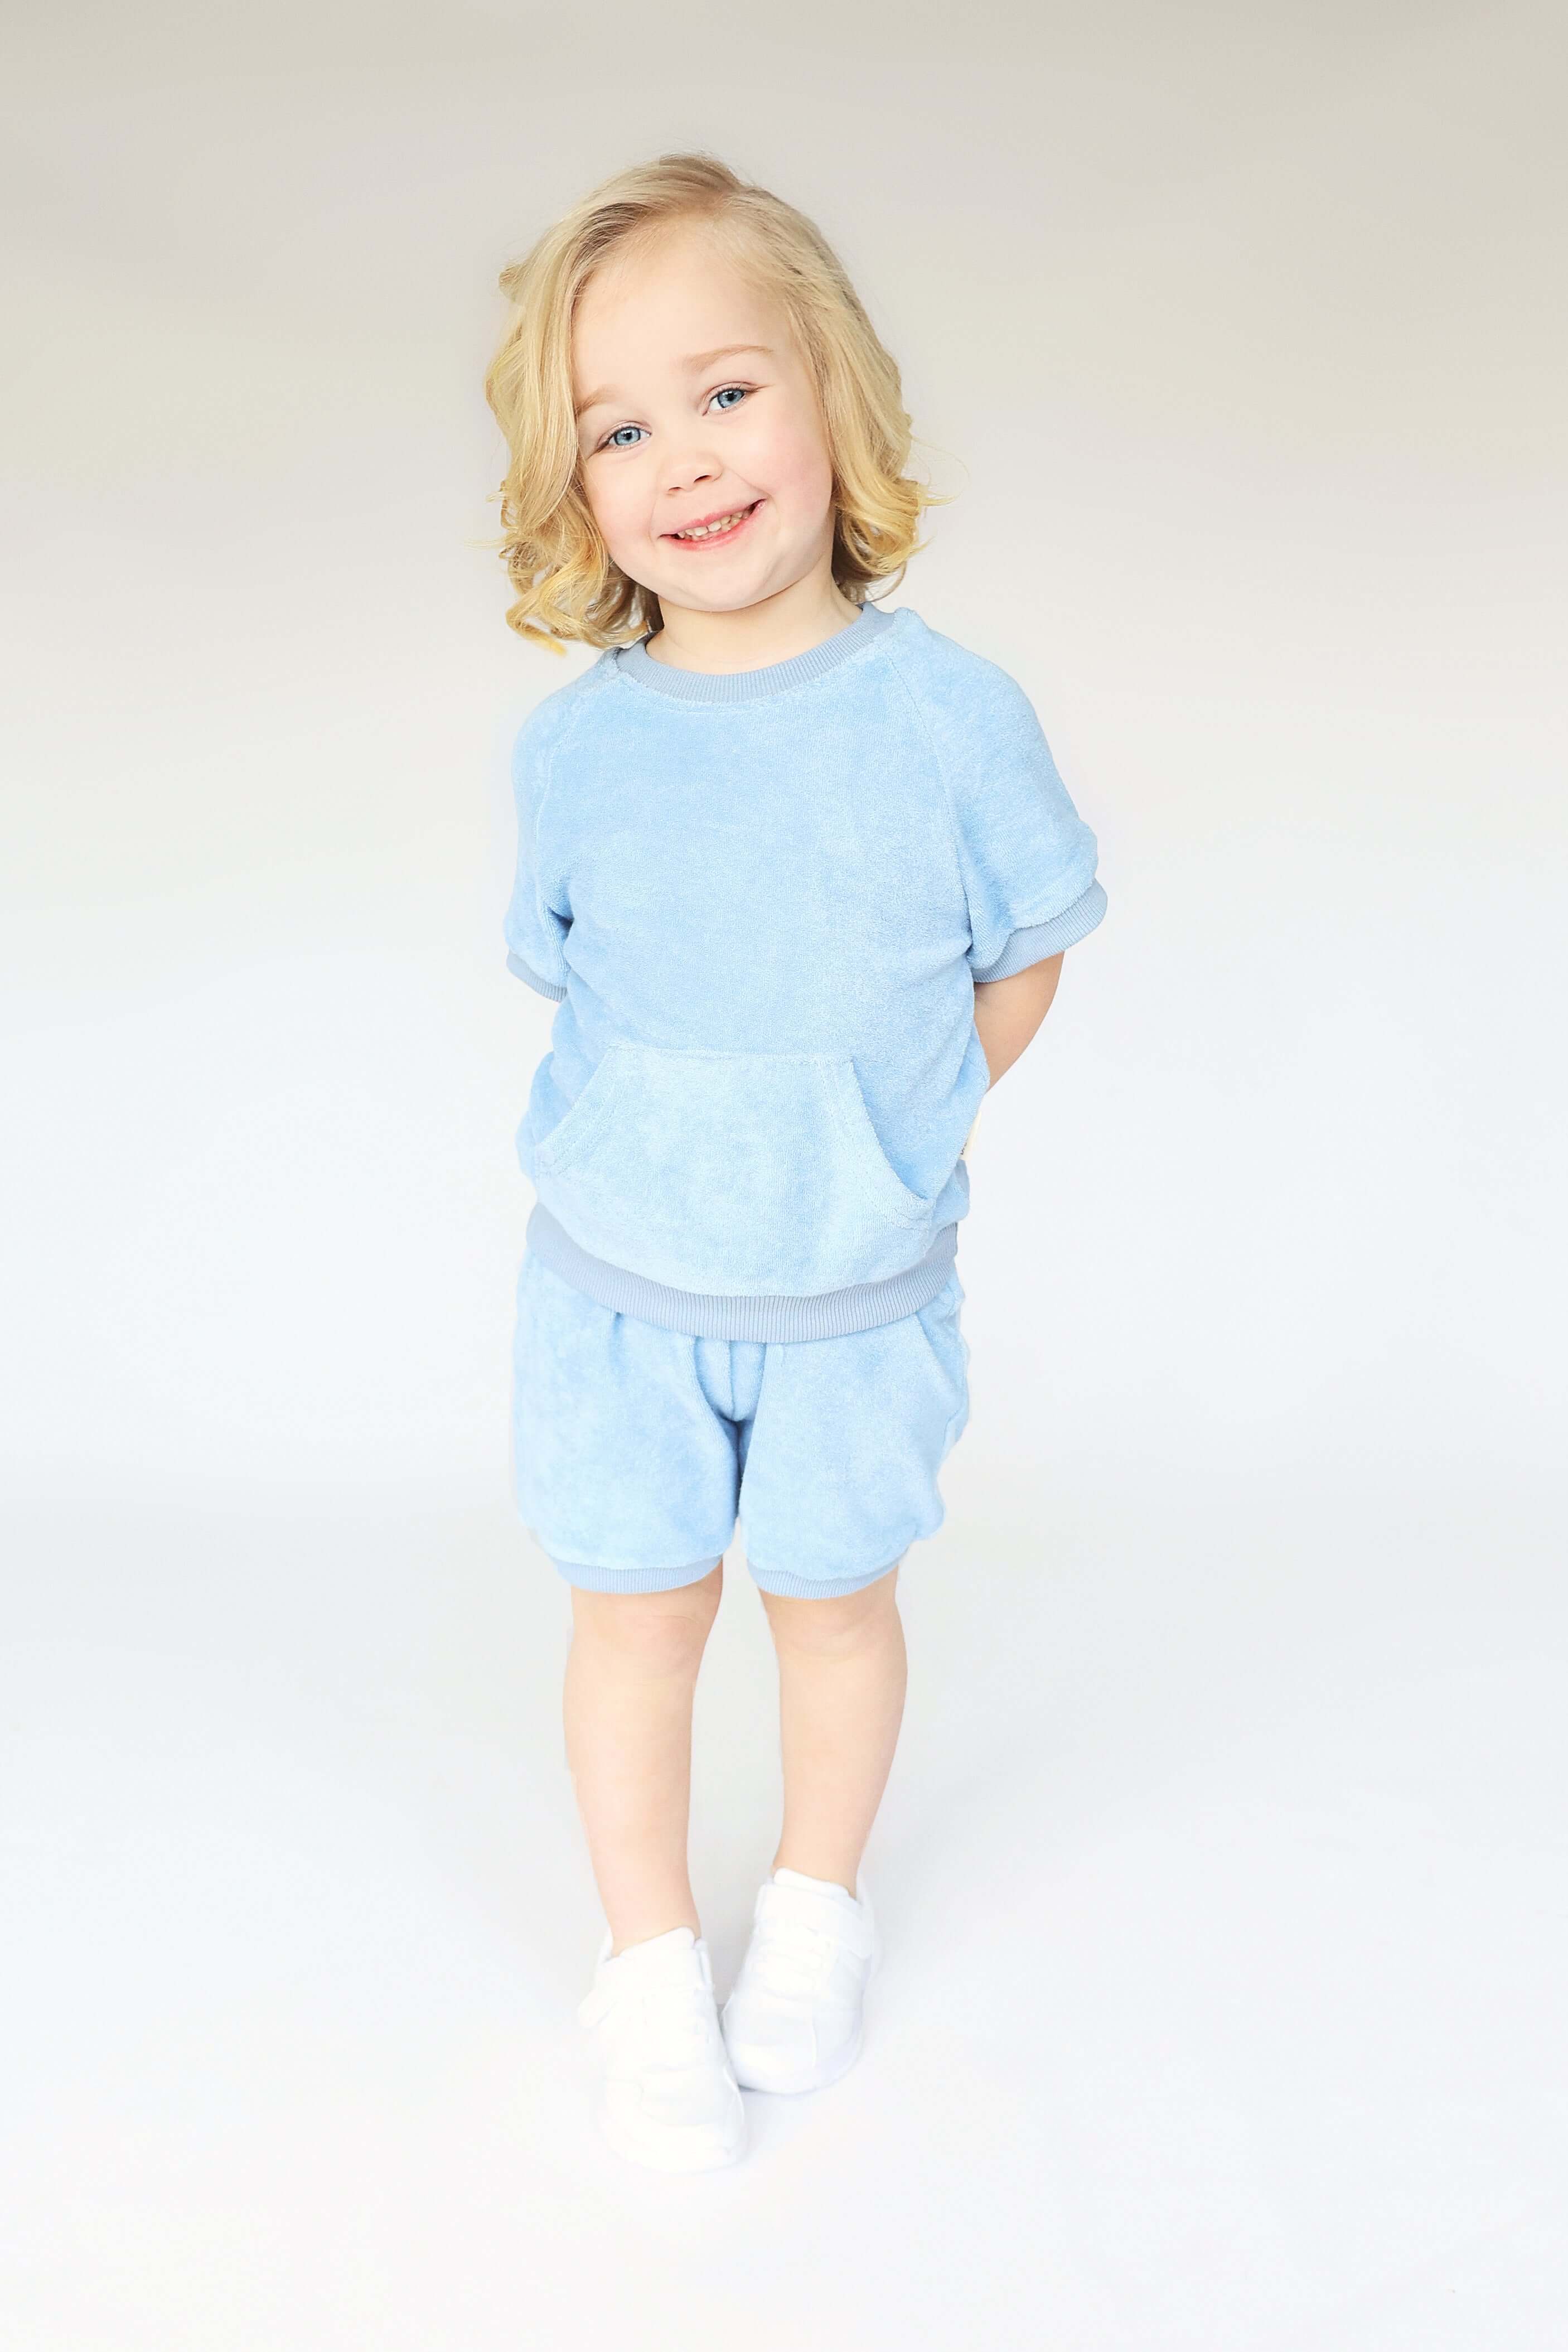 Sky Blue Towelling Cotton Summer Tracksuit Unisex DreamBuy